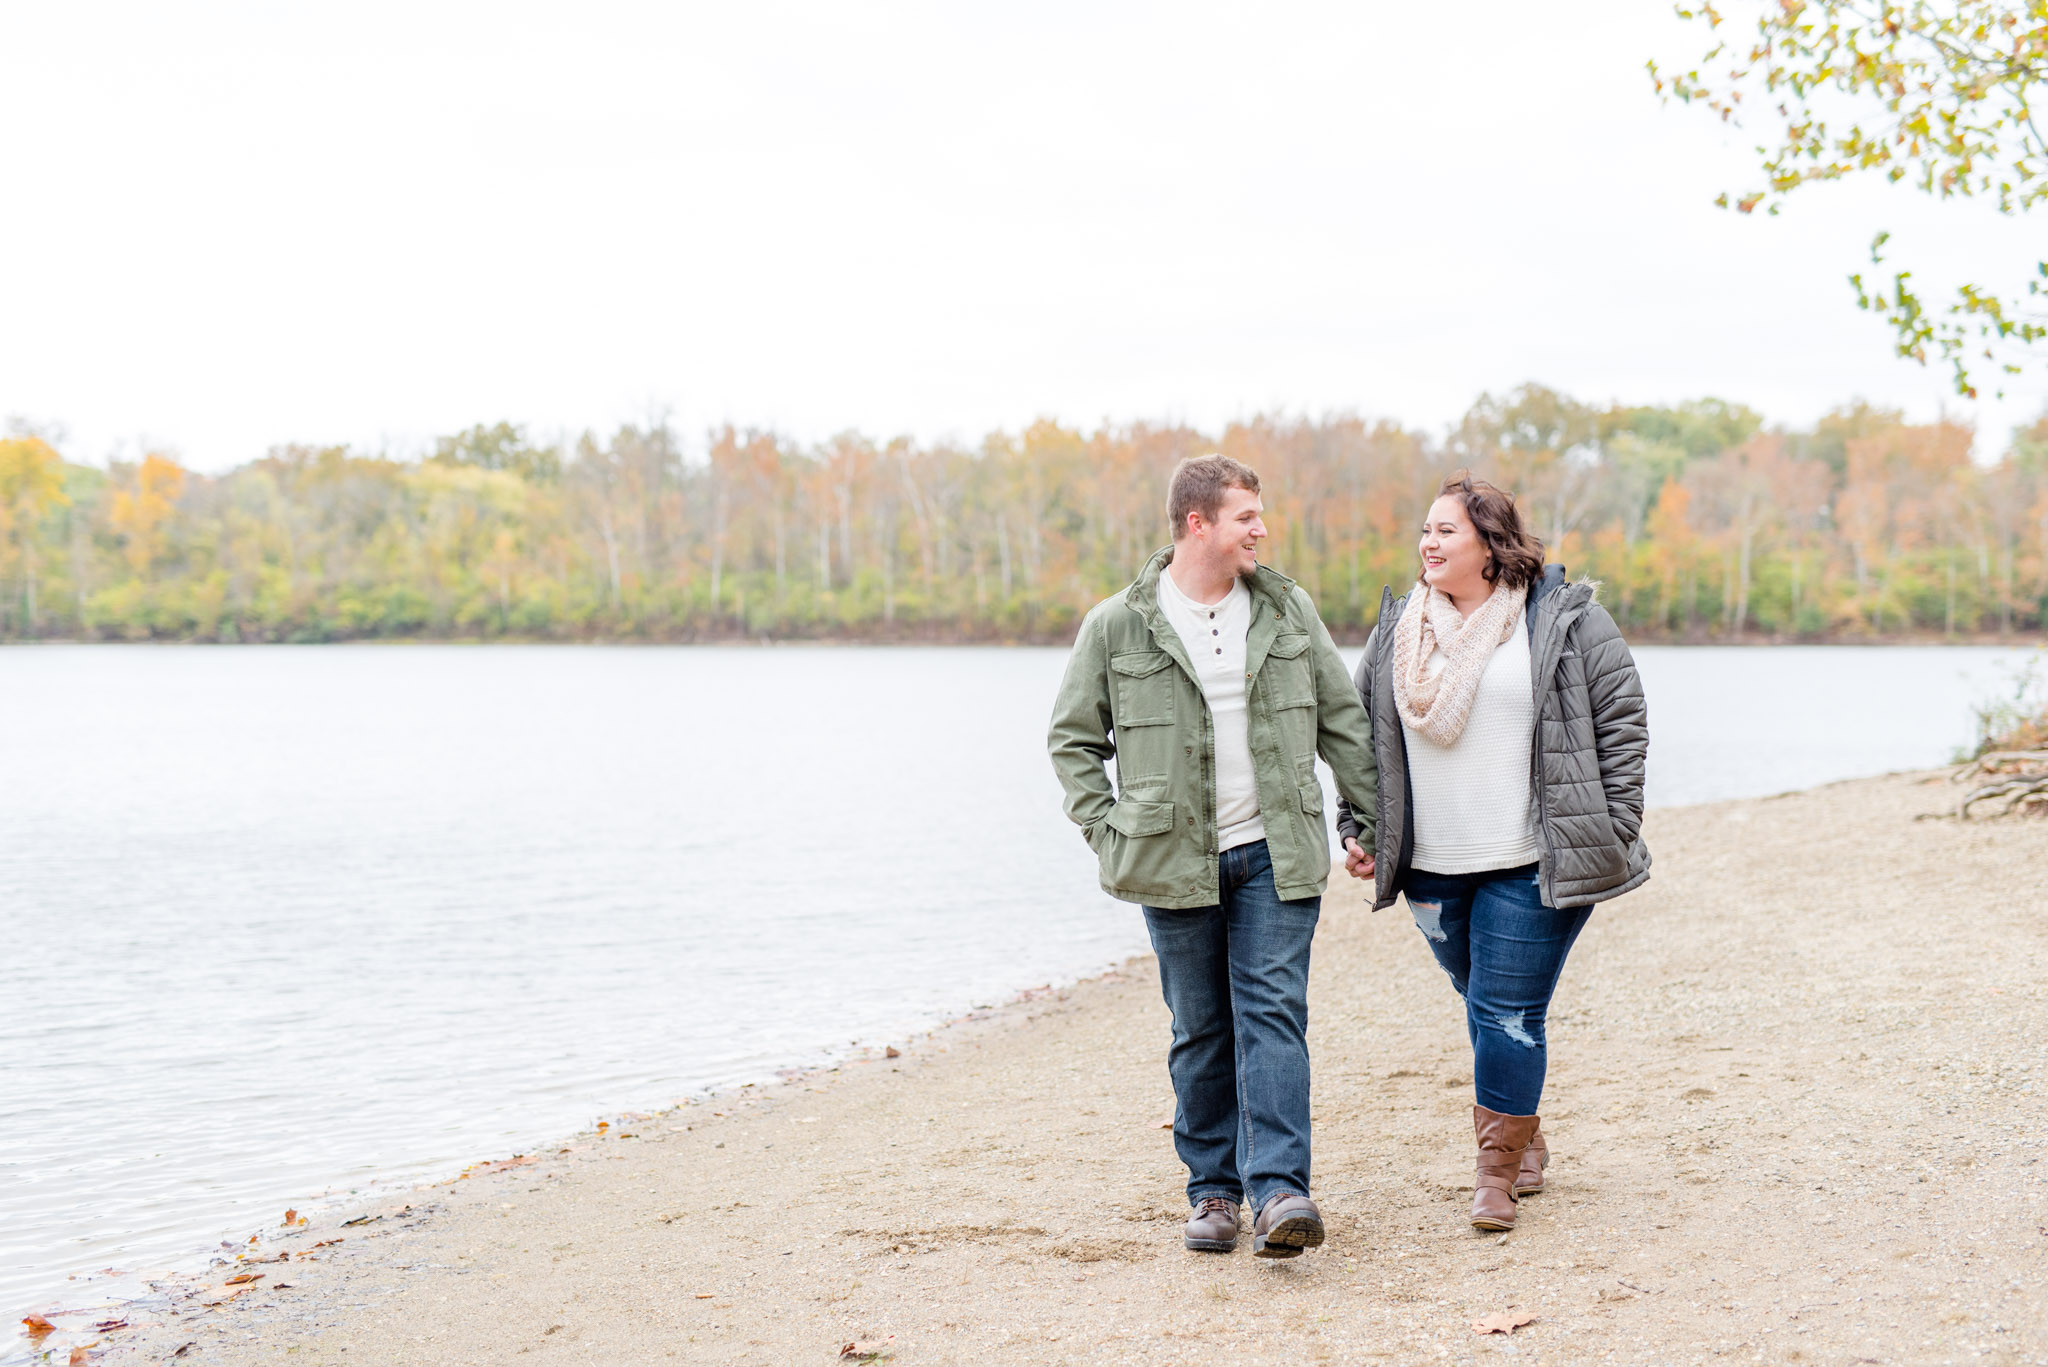 Bride and groom walk along riverbank during engagement pictures.